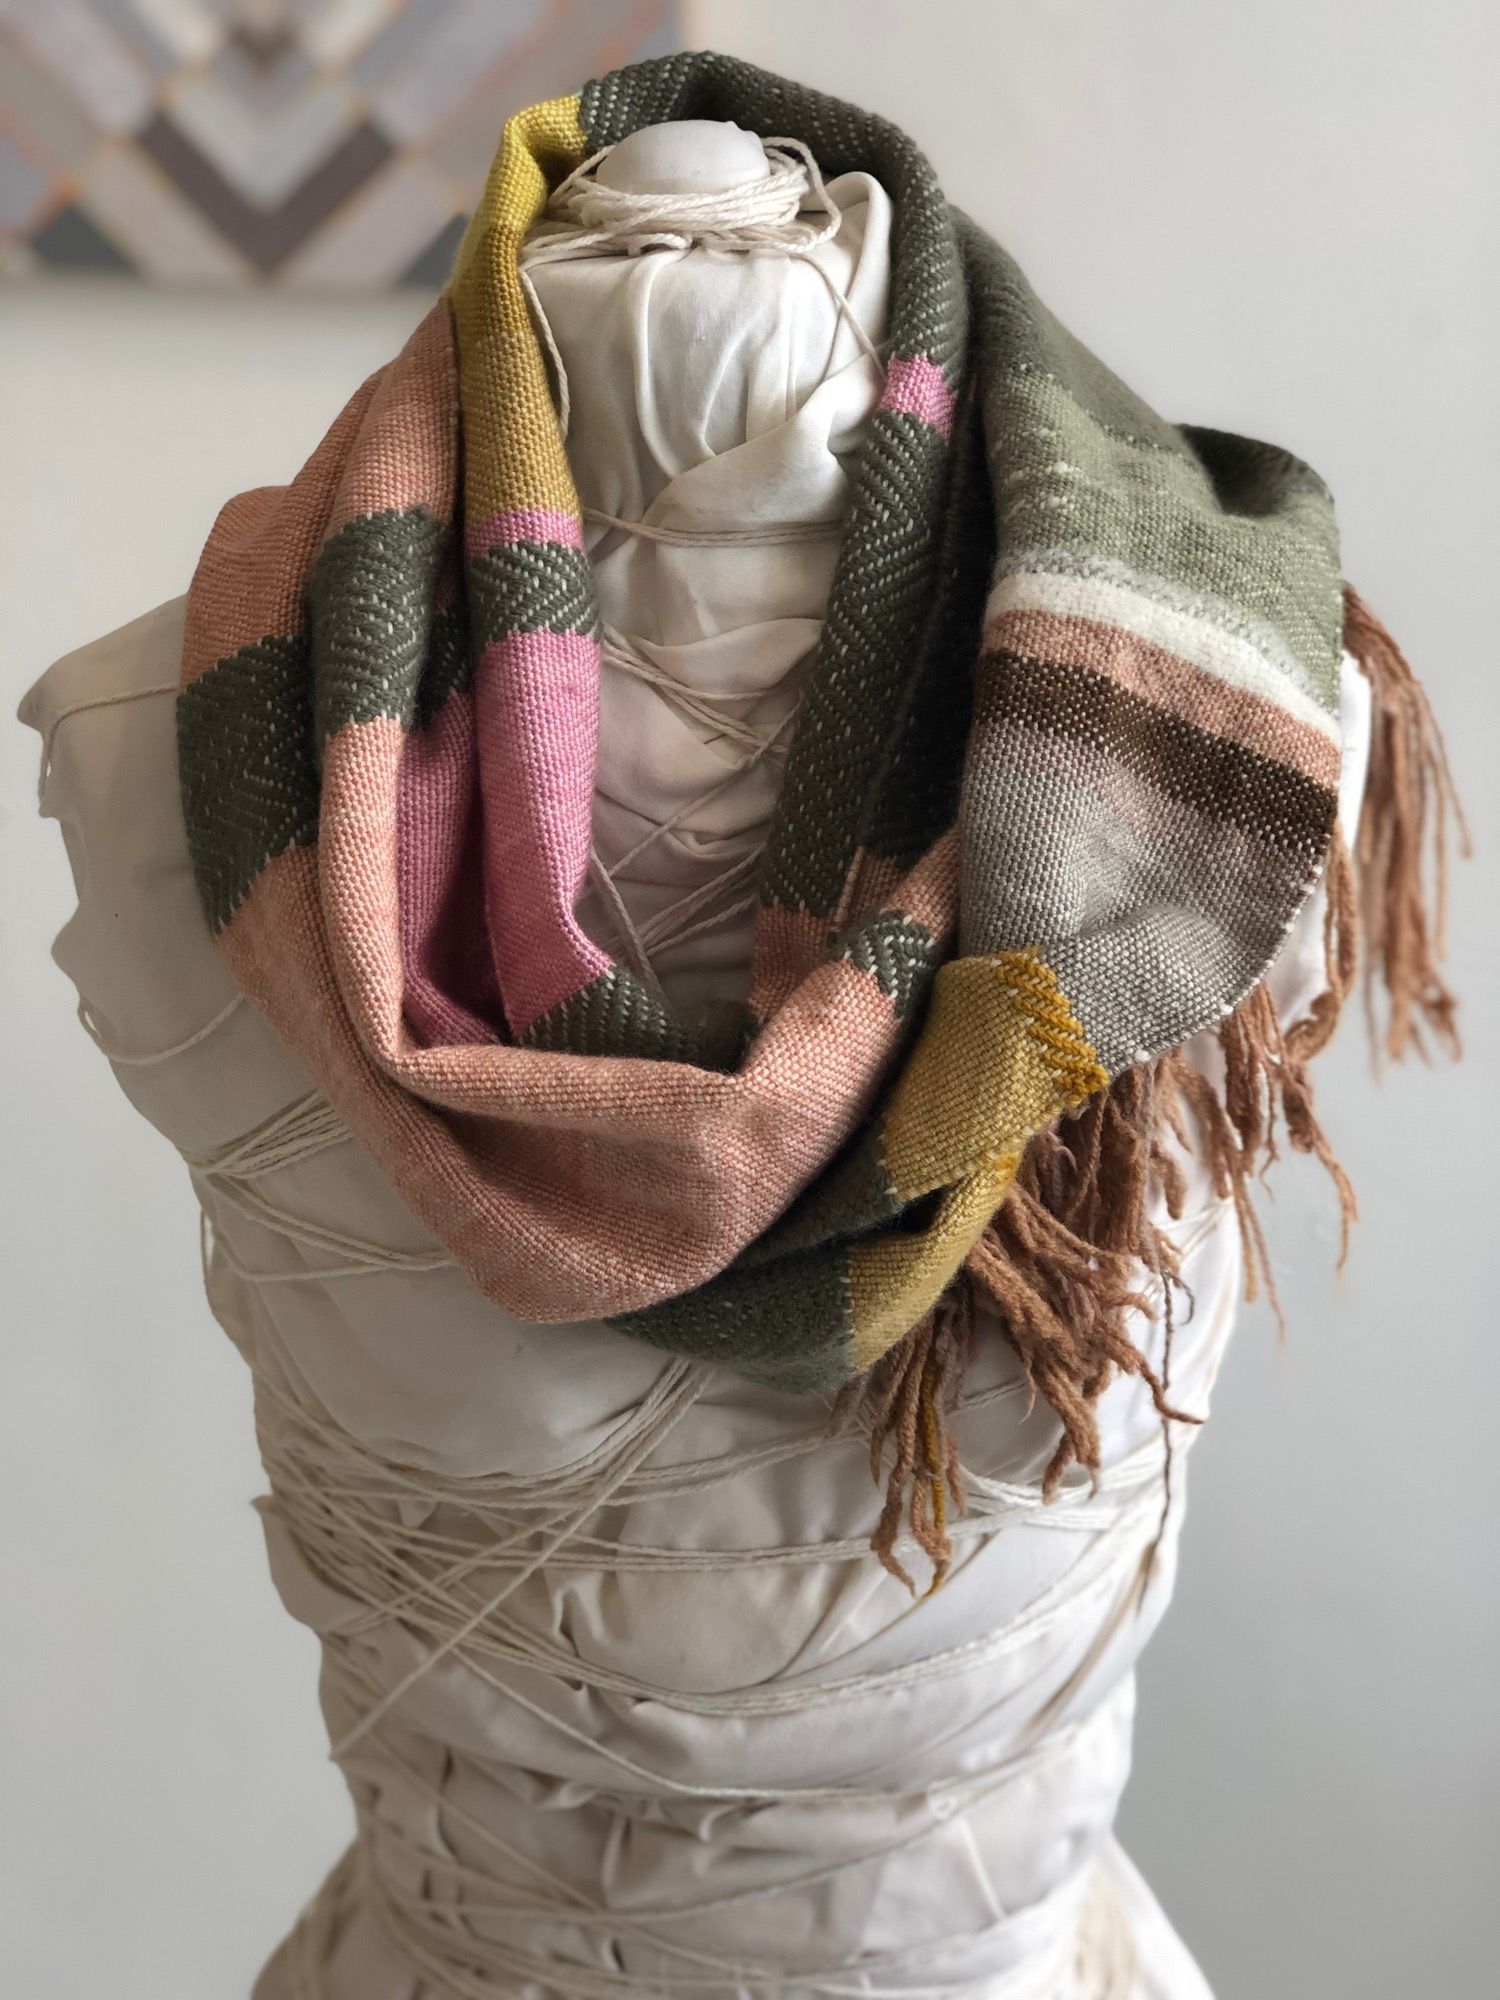 peach, yellow, green, pink and brown handwoven textured cowl scarf on a white mannequin in a white room